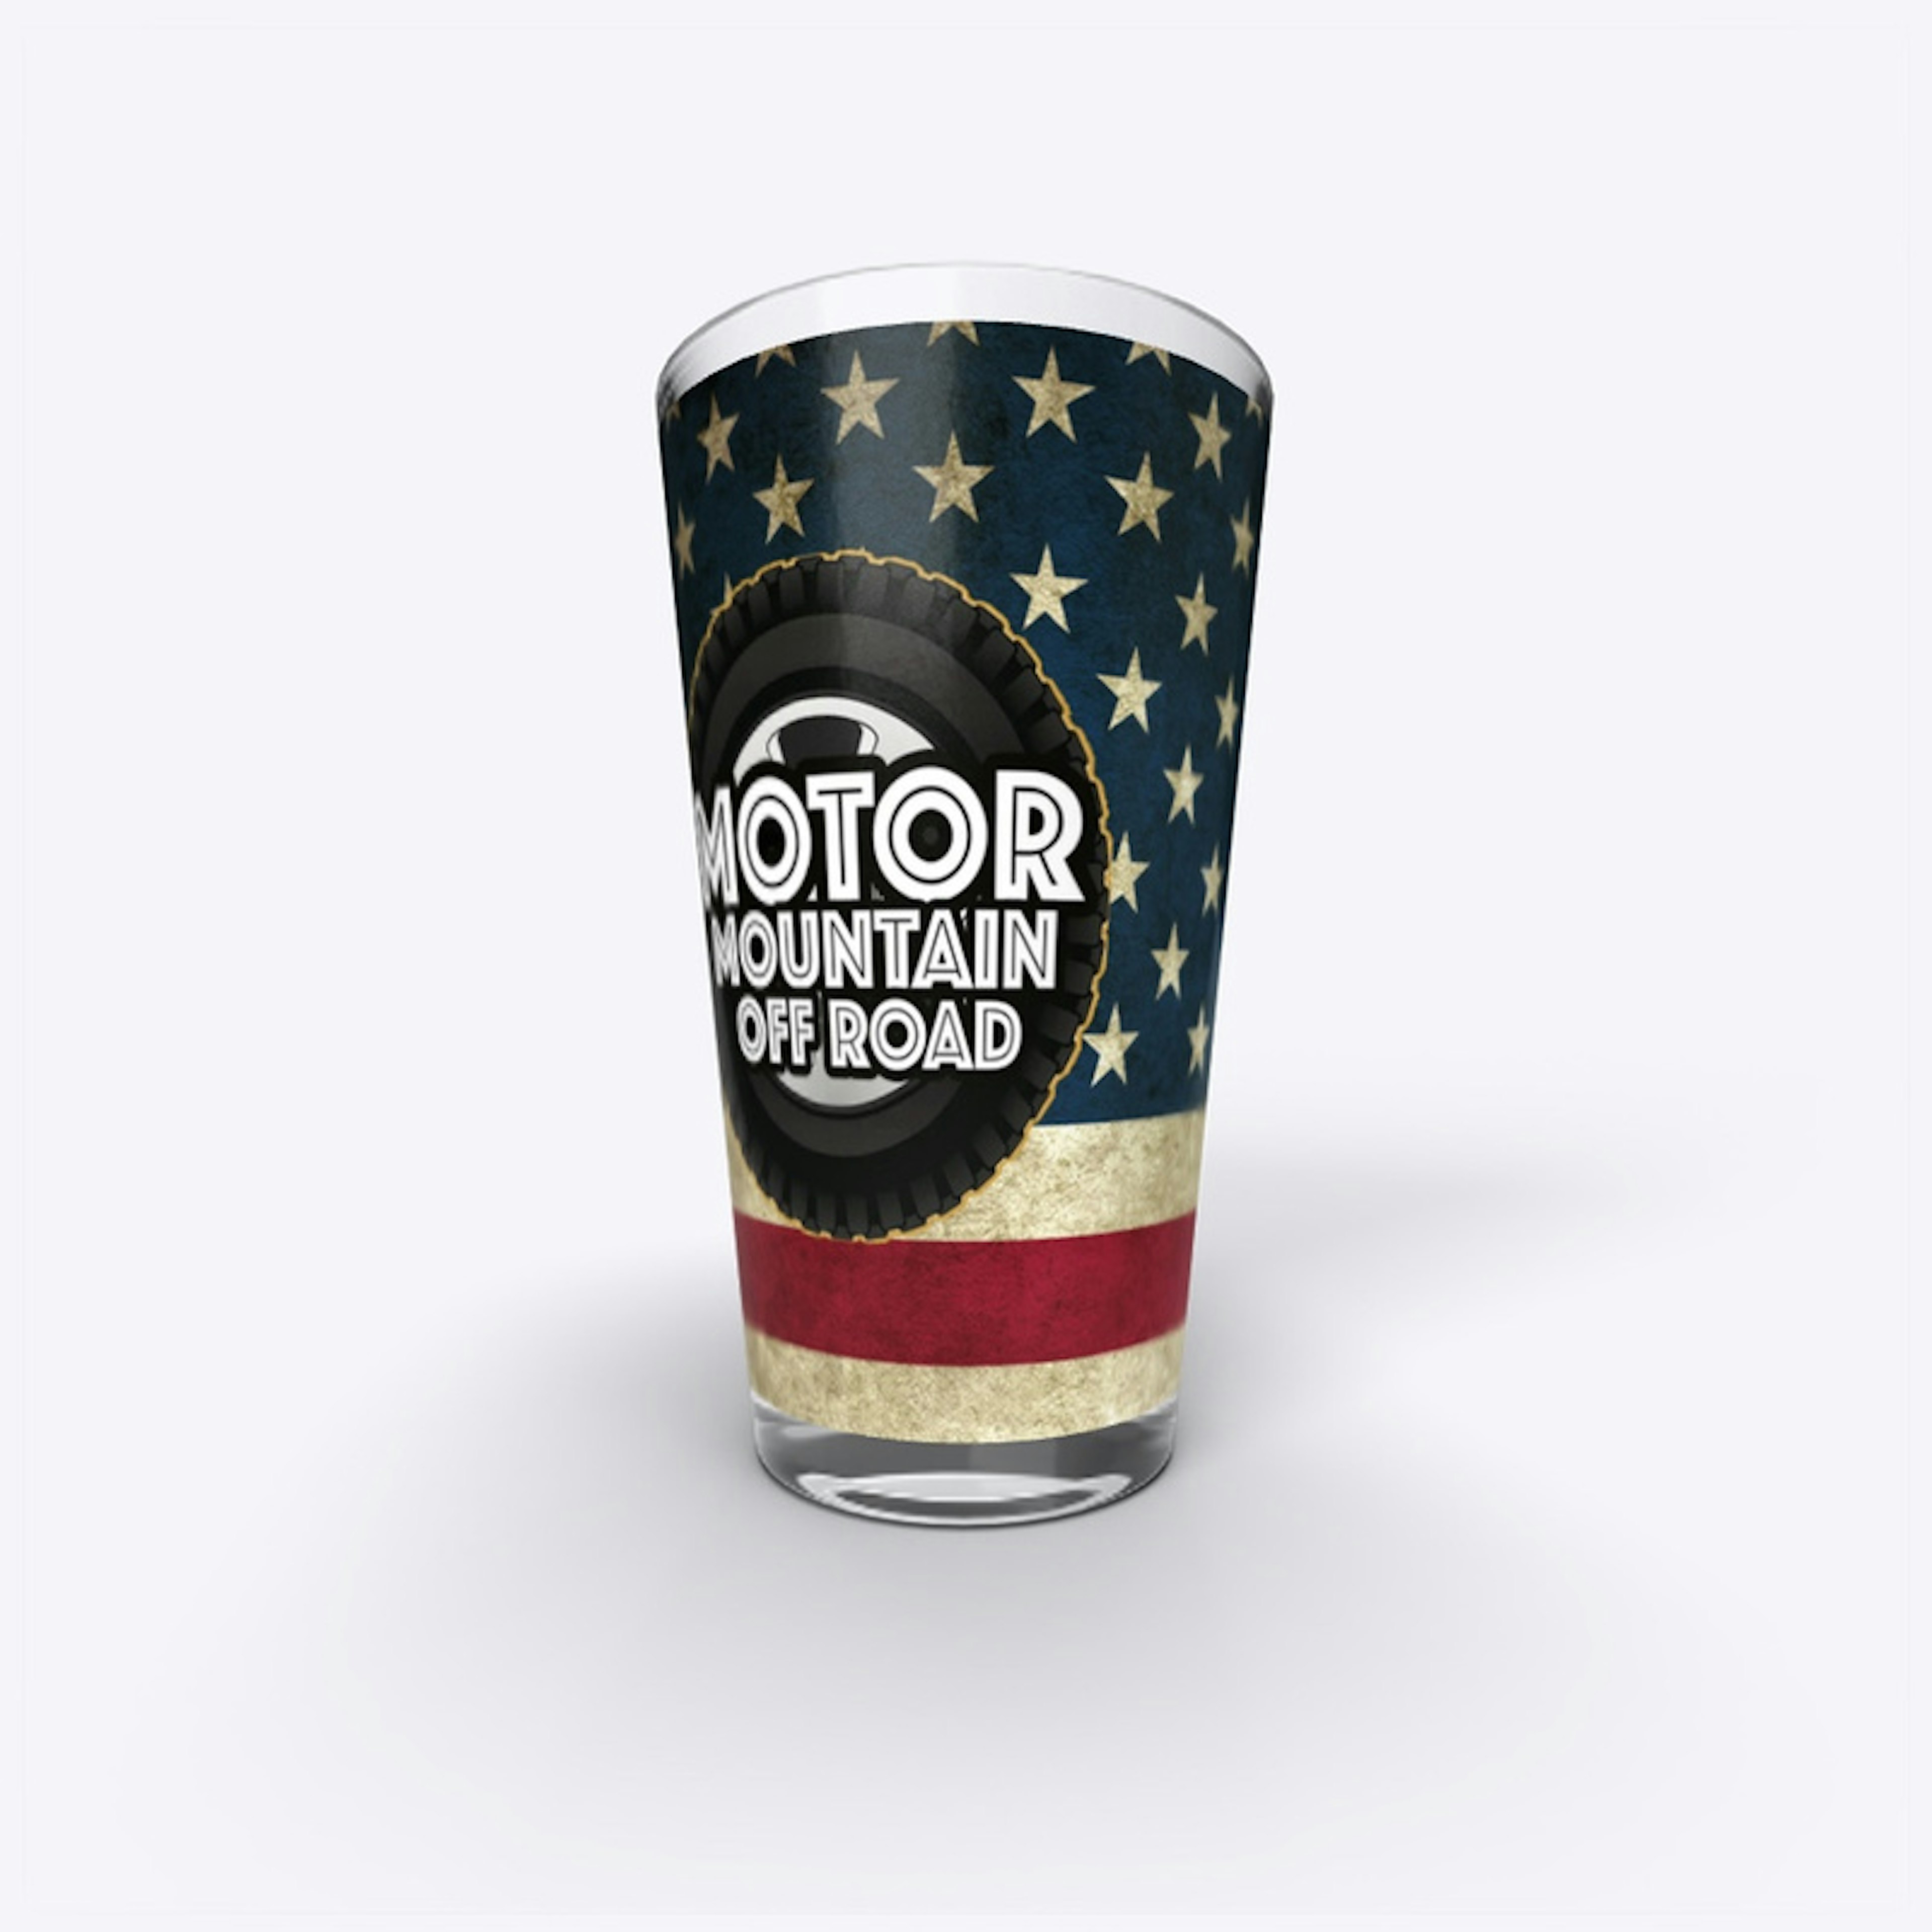 MOTOR MOUNTAIN OFF ROAD PINT GLASS